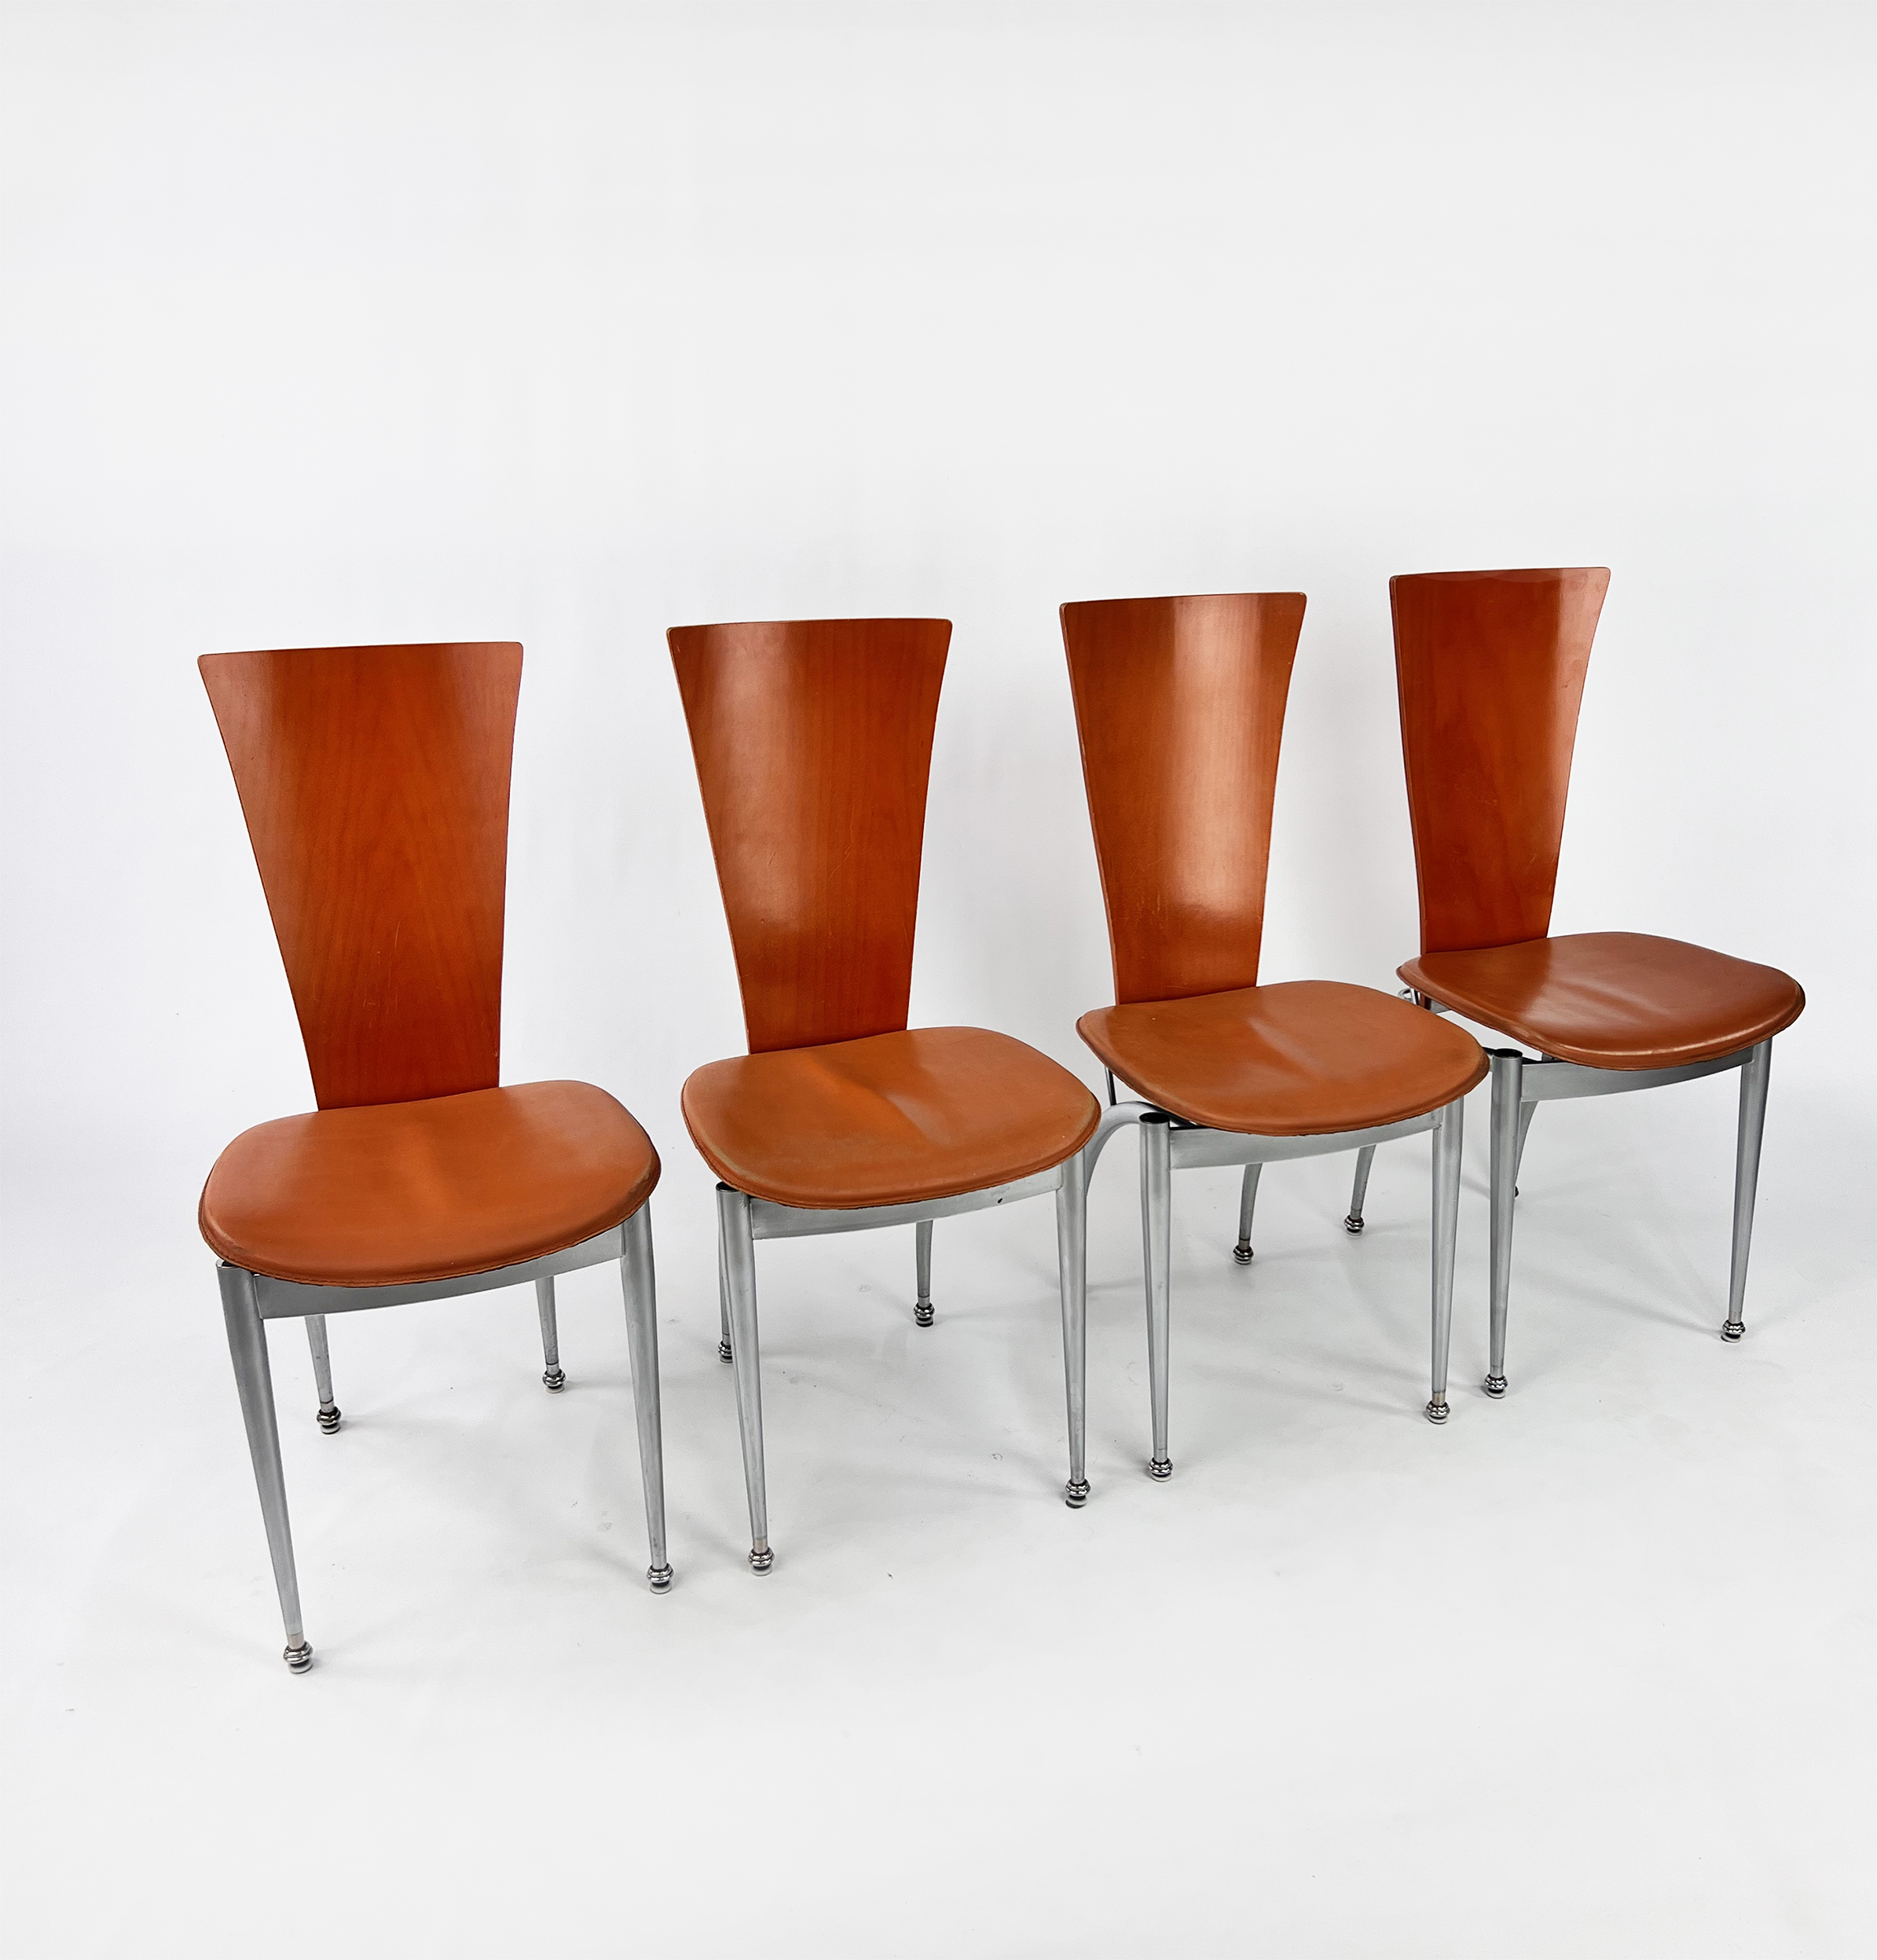 Set of 4 Zino Chairs by Harvink, 1980s